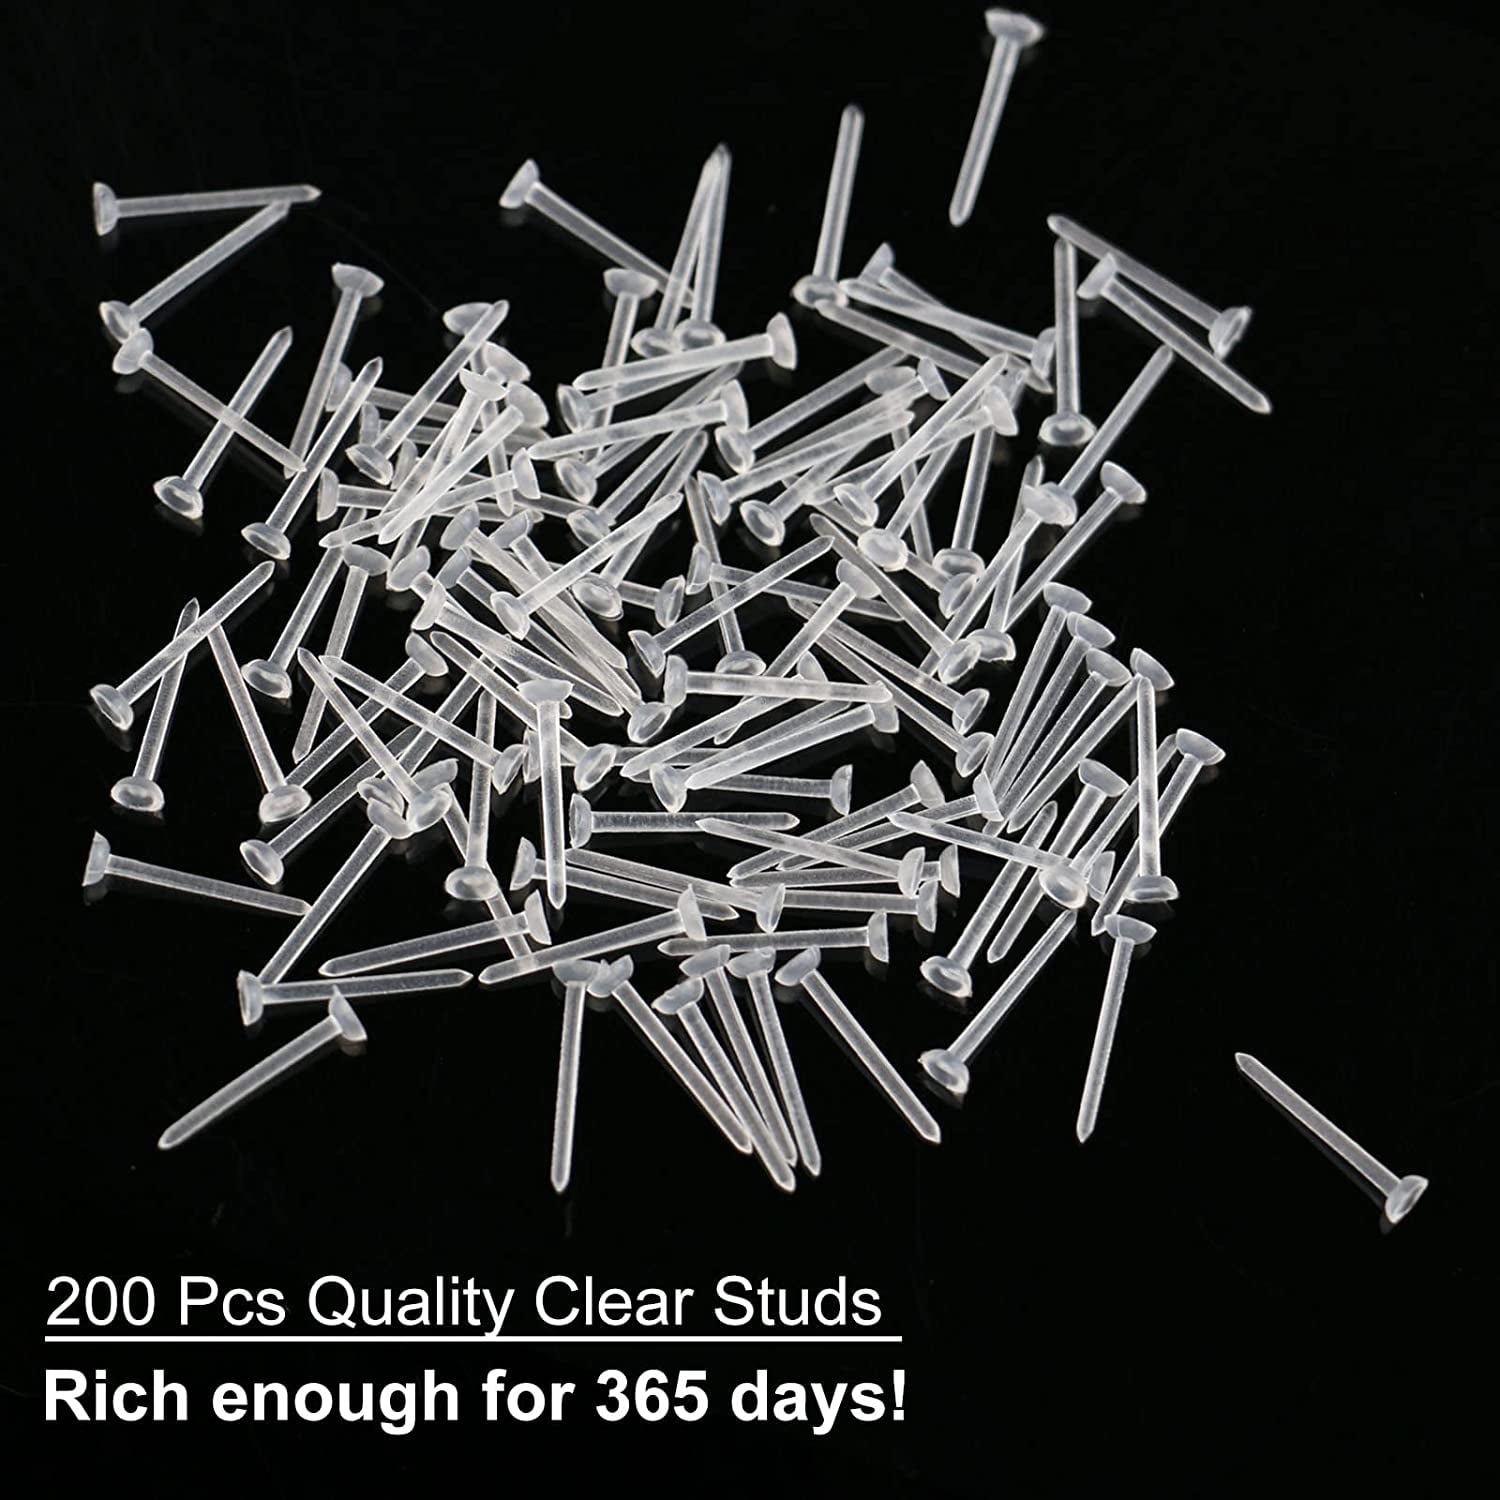 Clear Silicone Earrings for Sports,300 Pairs Clear Plastic Earring Posts  and Earring Backs,5mm Cup-Headed